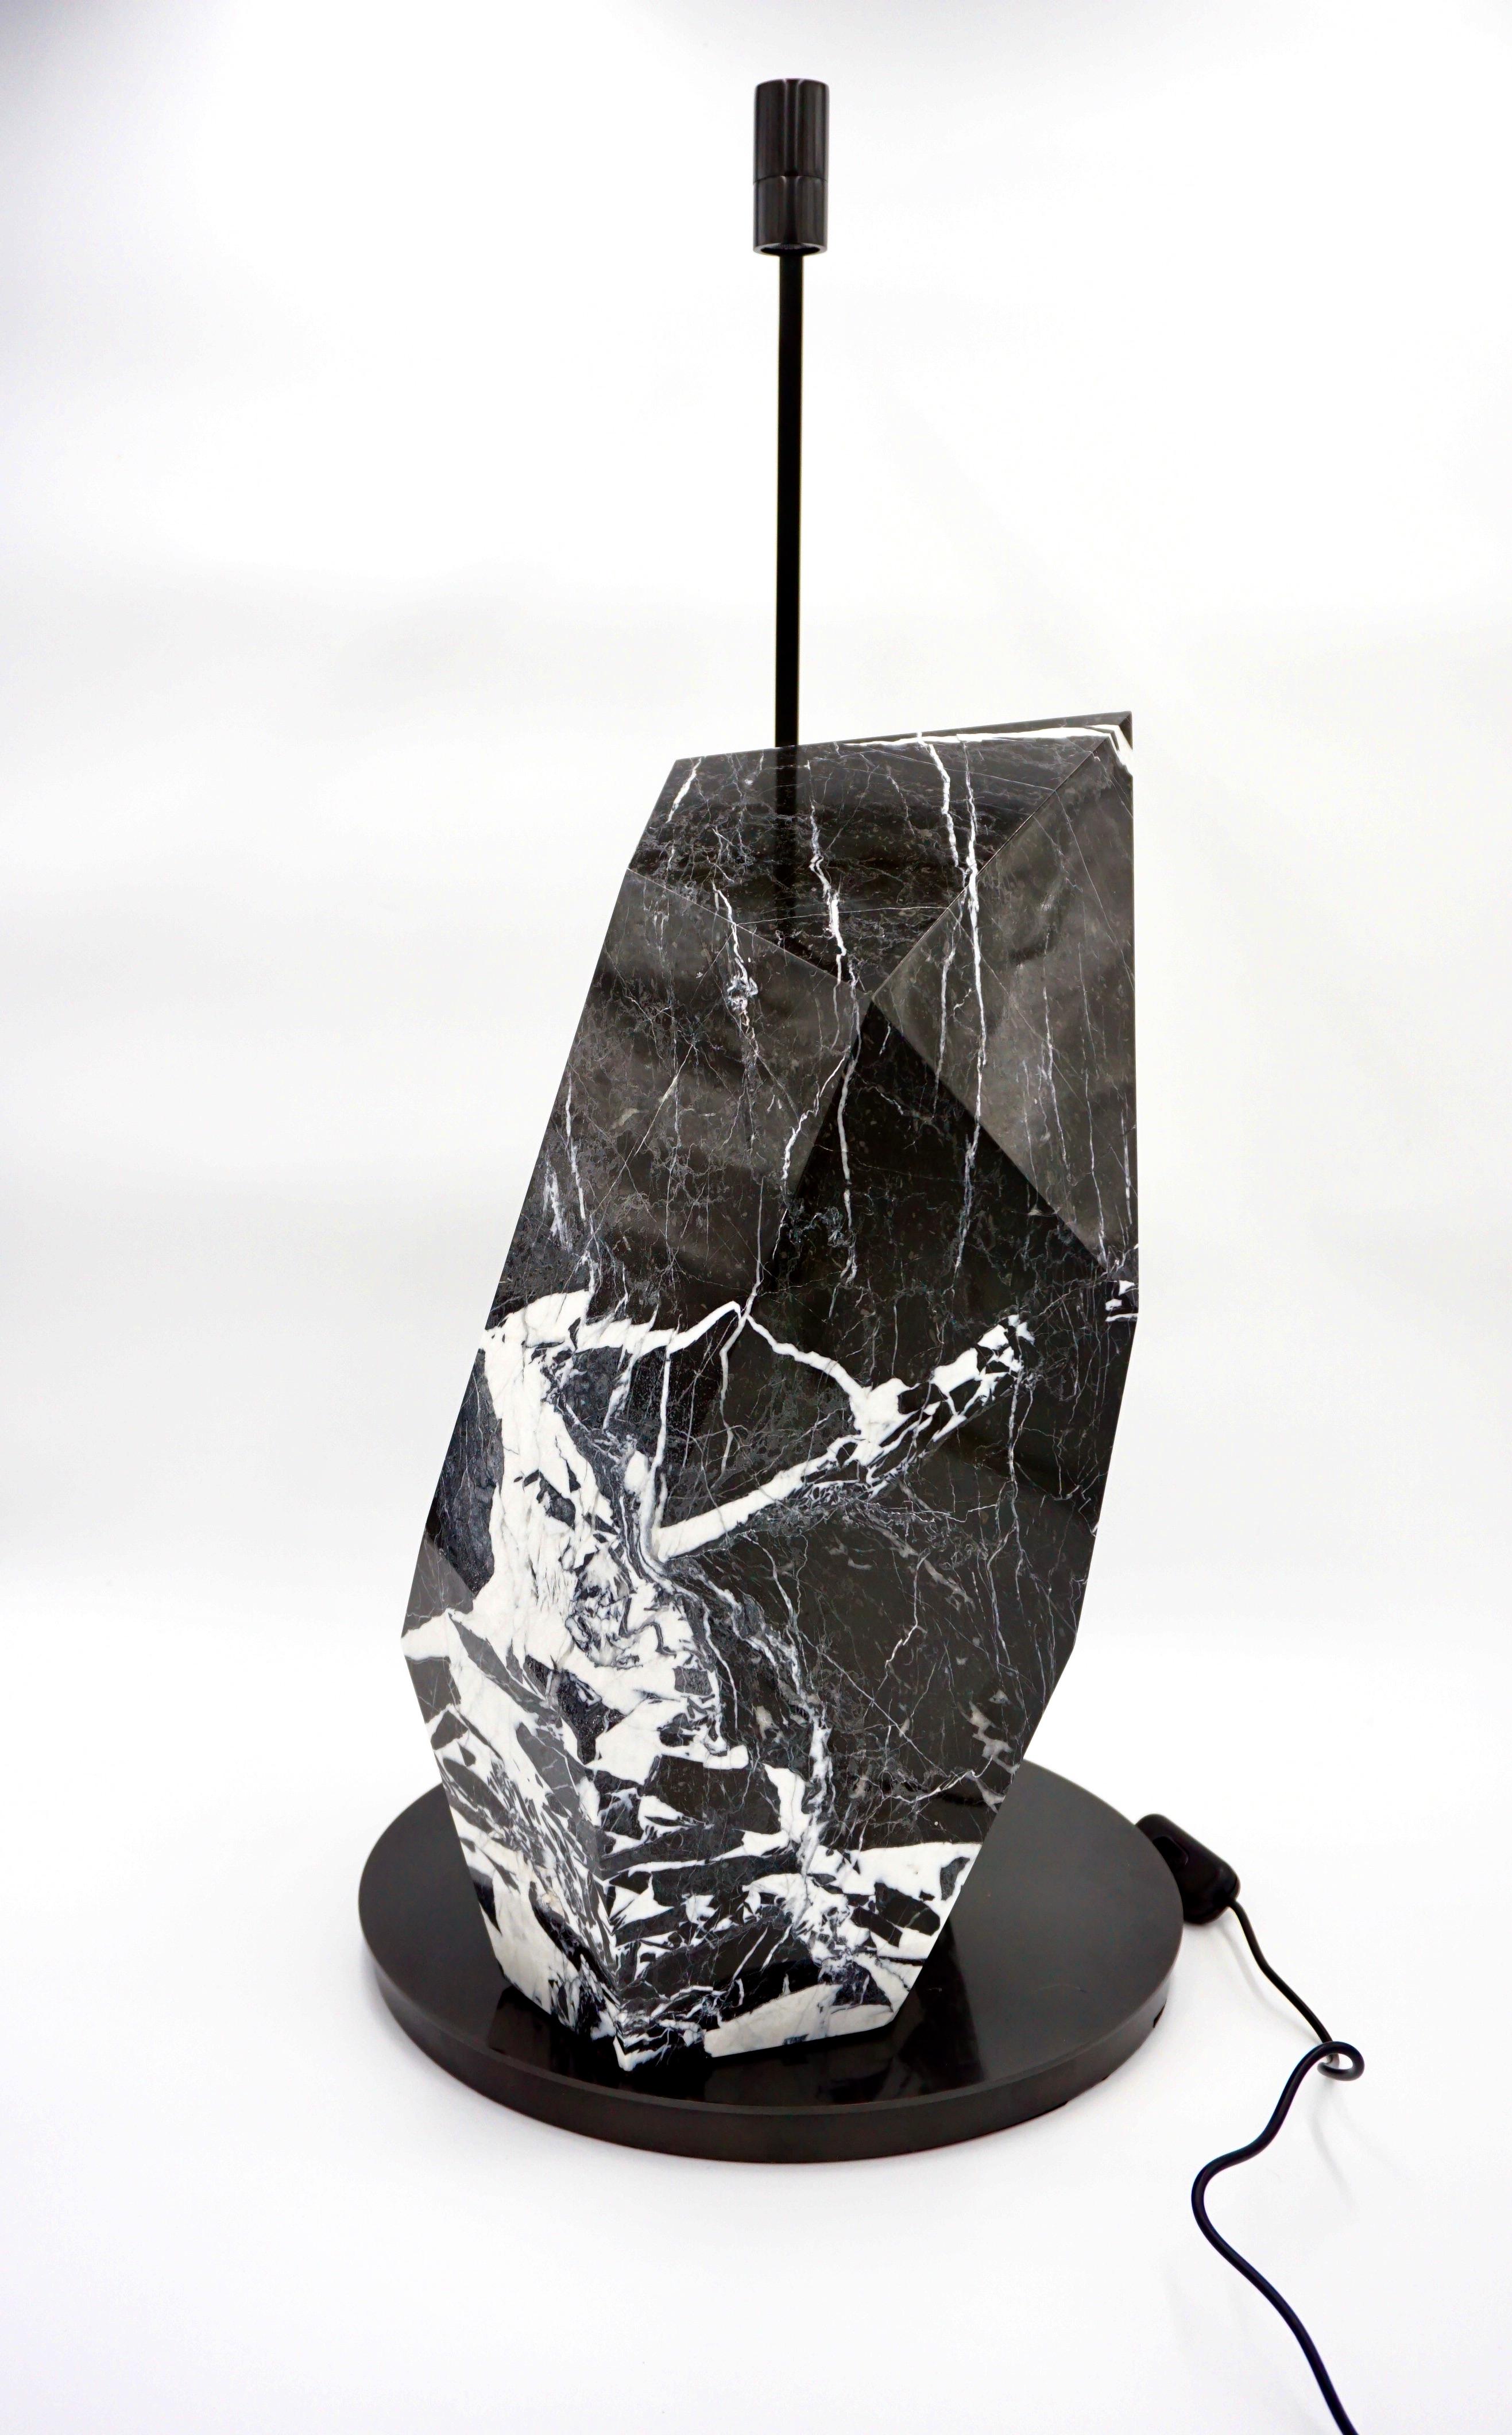 BLACK POLYHEDRUM sculptural marble table lamp designed by Lorenzo Ciompi, 2023
grand antique black marble sculpted and hand polished to a glossy patina
on a original brass satined big table lamp; led 2W war light 
sculpture measurements: height: